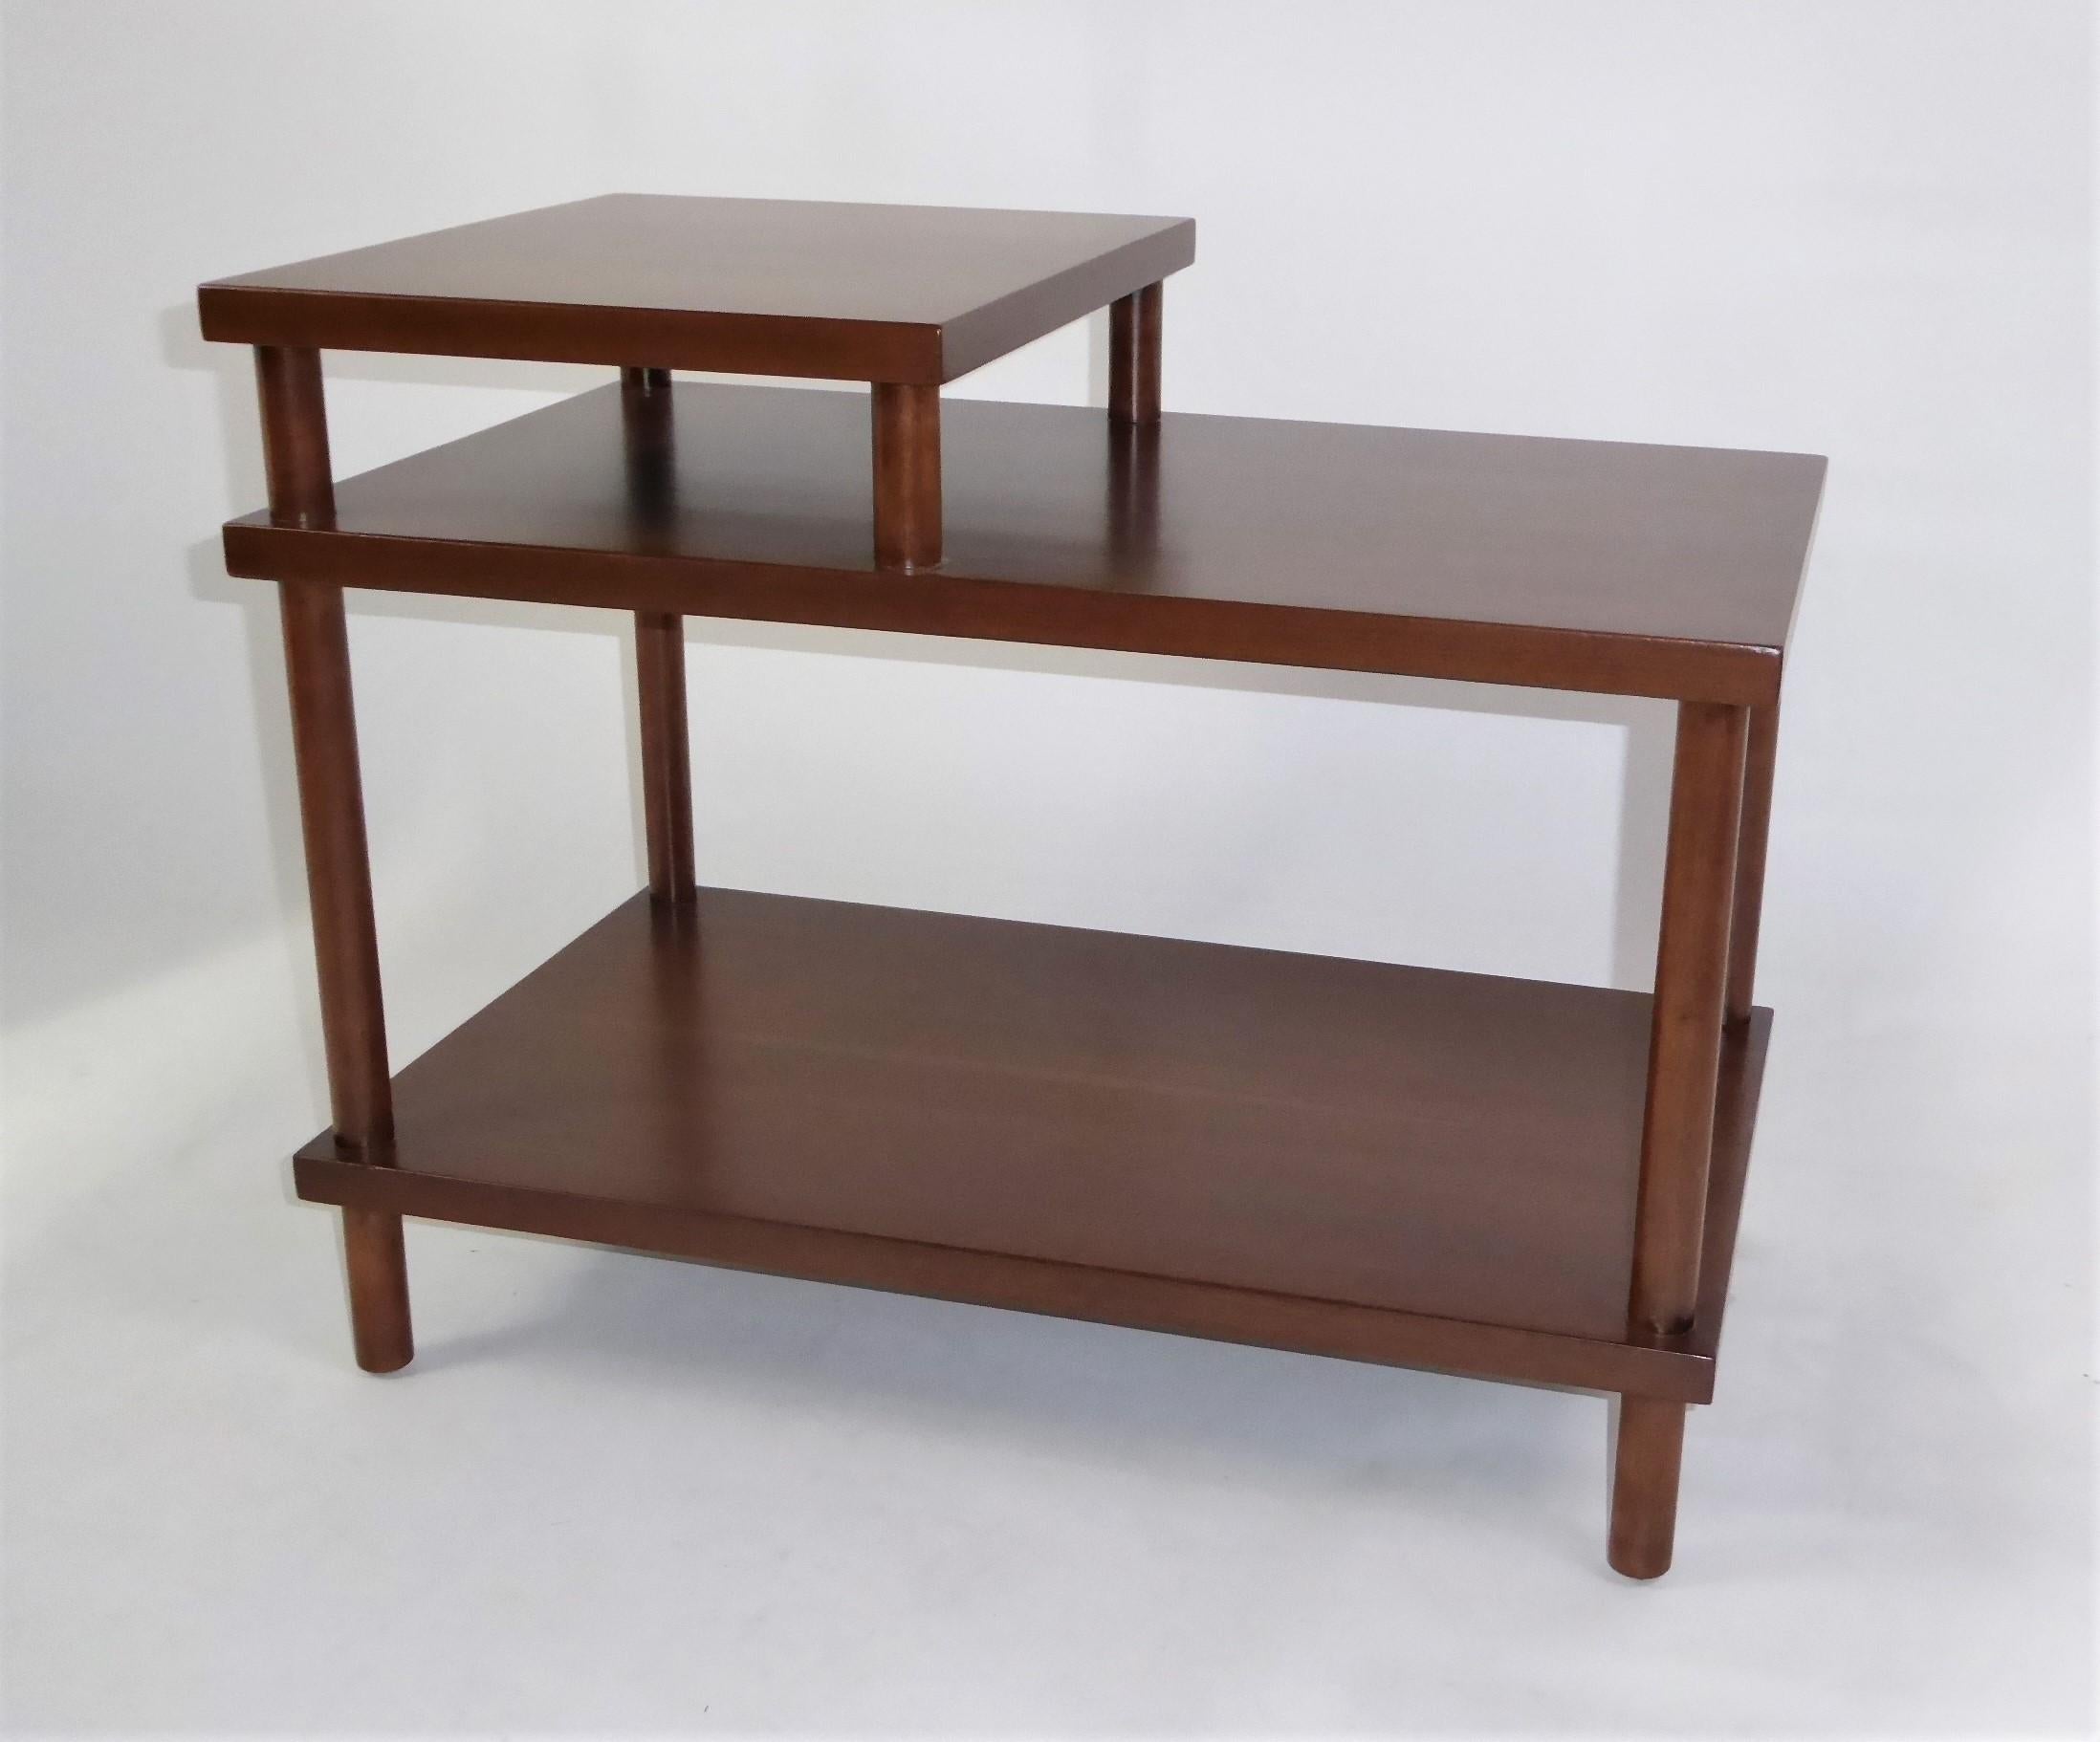 Early 1950s side table by T. H. Robsjohn Gibbings for Widdicomb. Restored finish to the walnut table with a stepped form with rounded dowel supports. Beautiful figured wood. We like it displayed from the side. Retains Widdicomb cloth label with